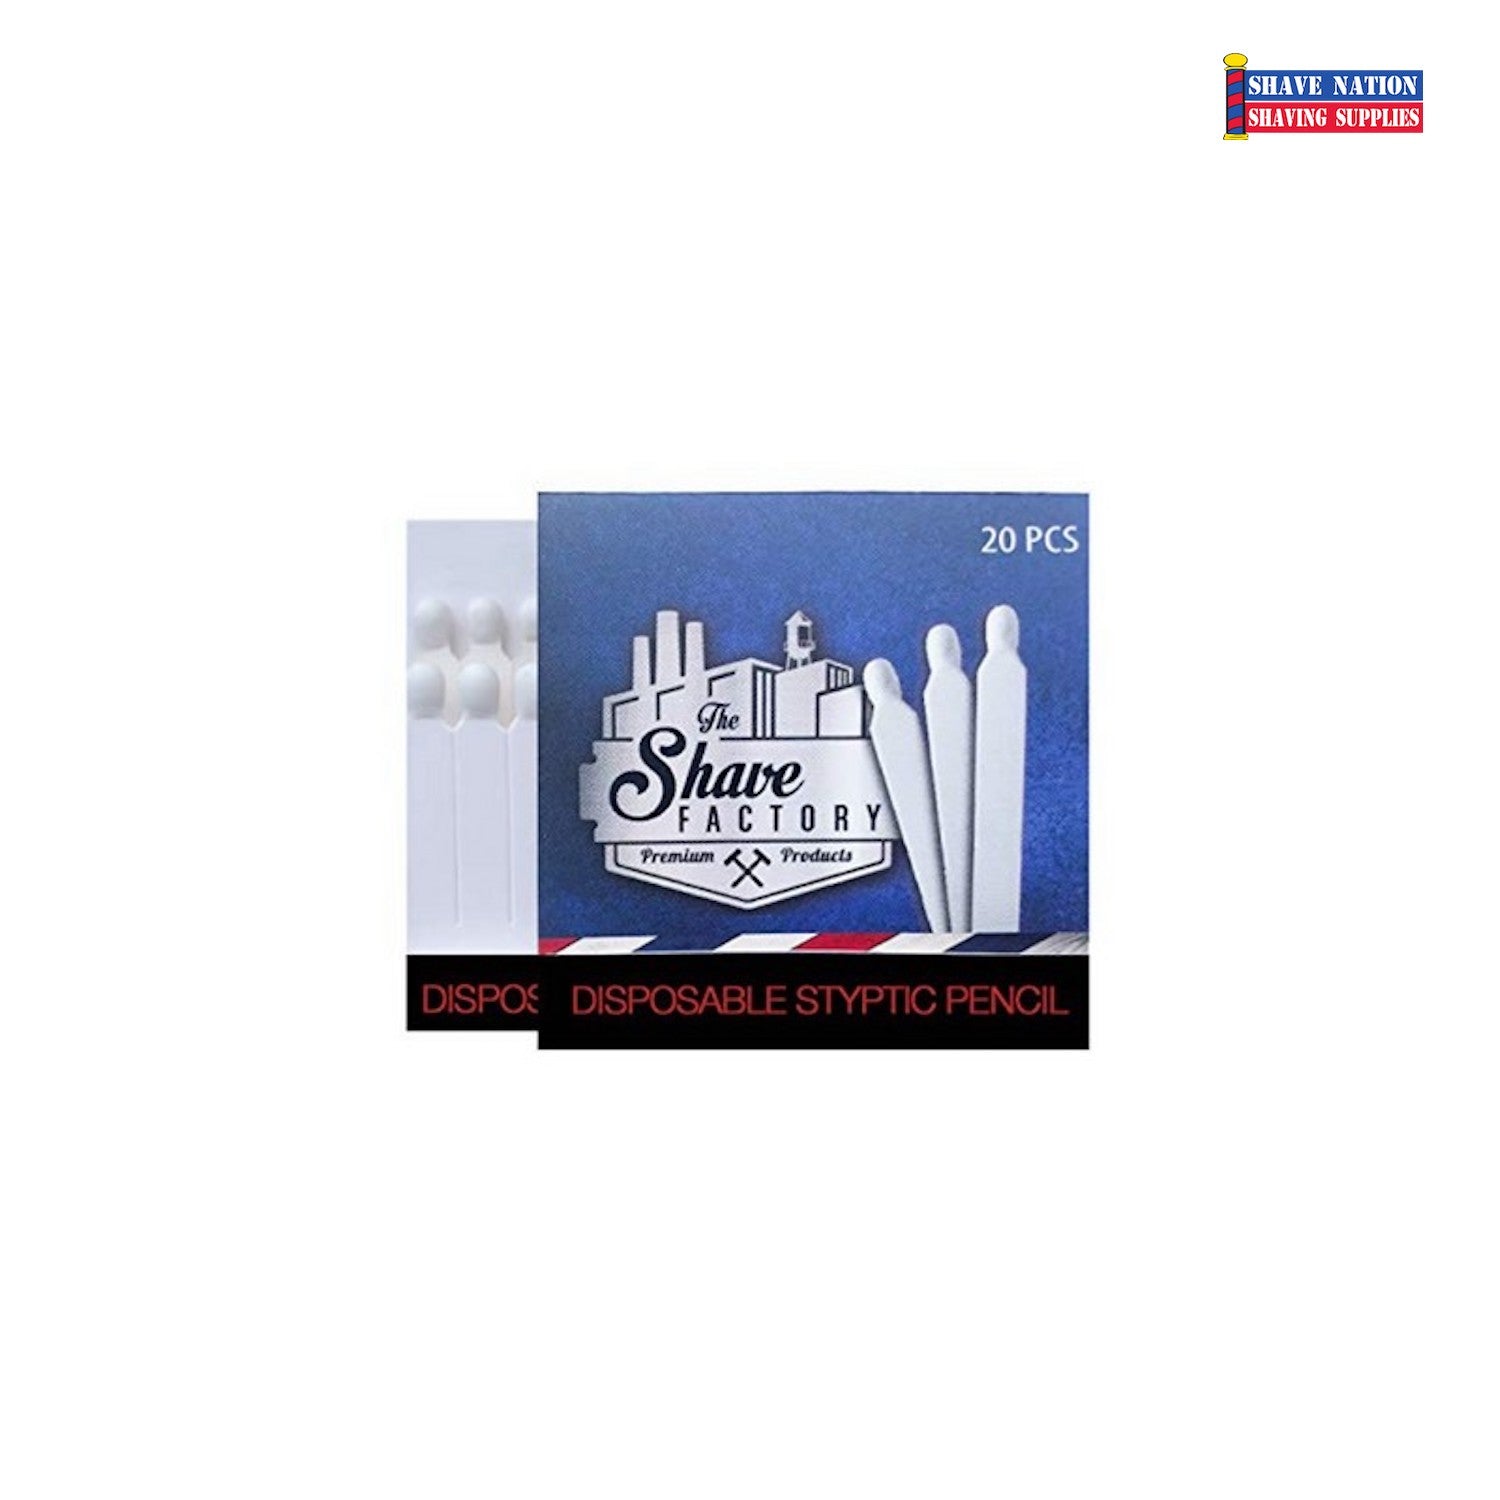 Shave Factory Disposable Styptic Pencil-Pack of 20